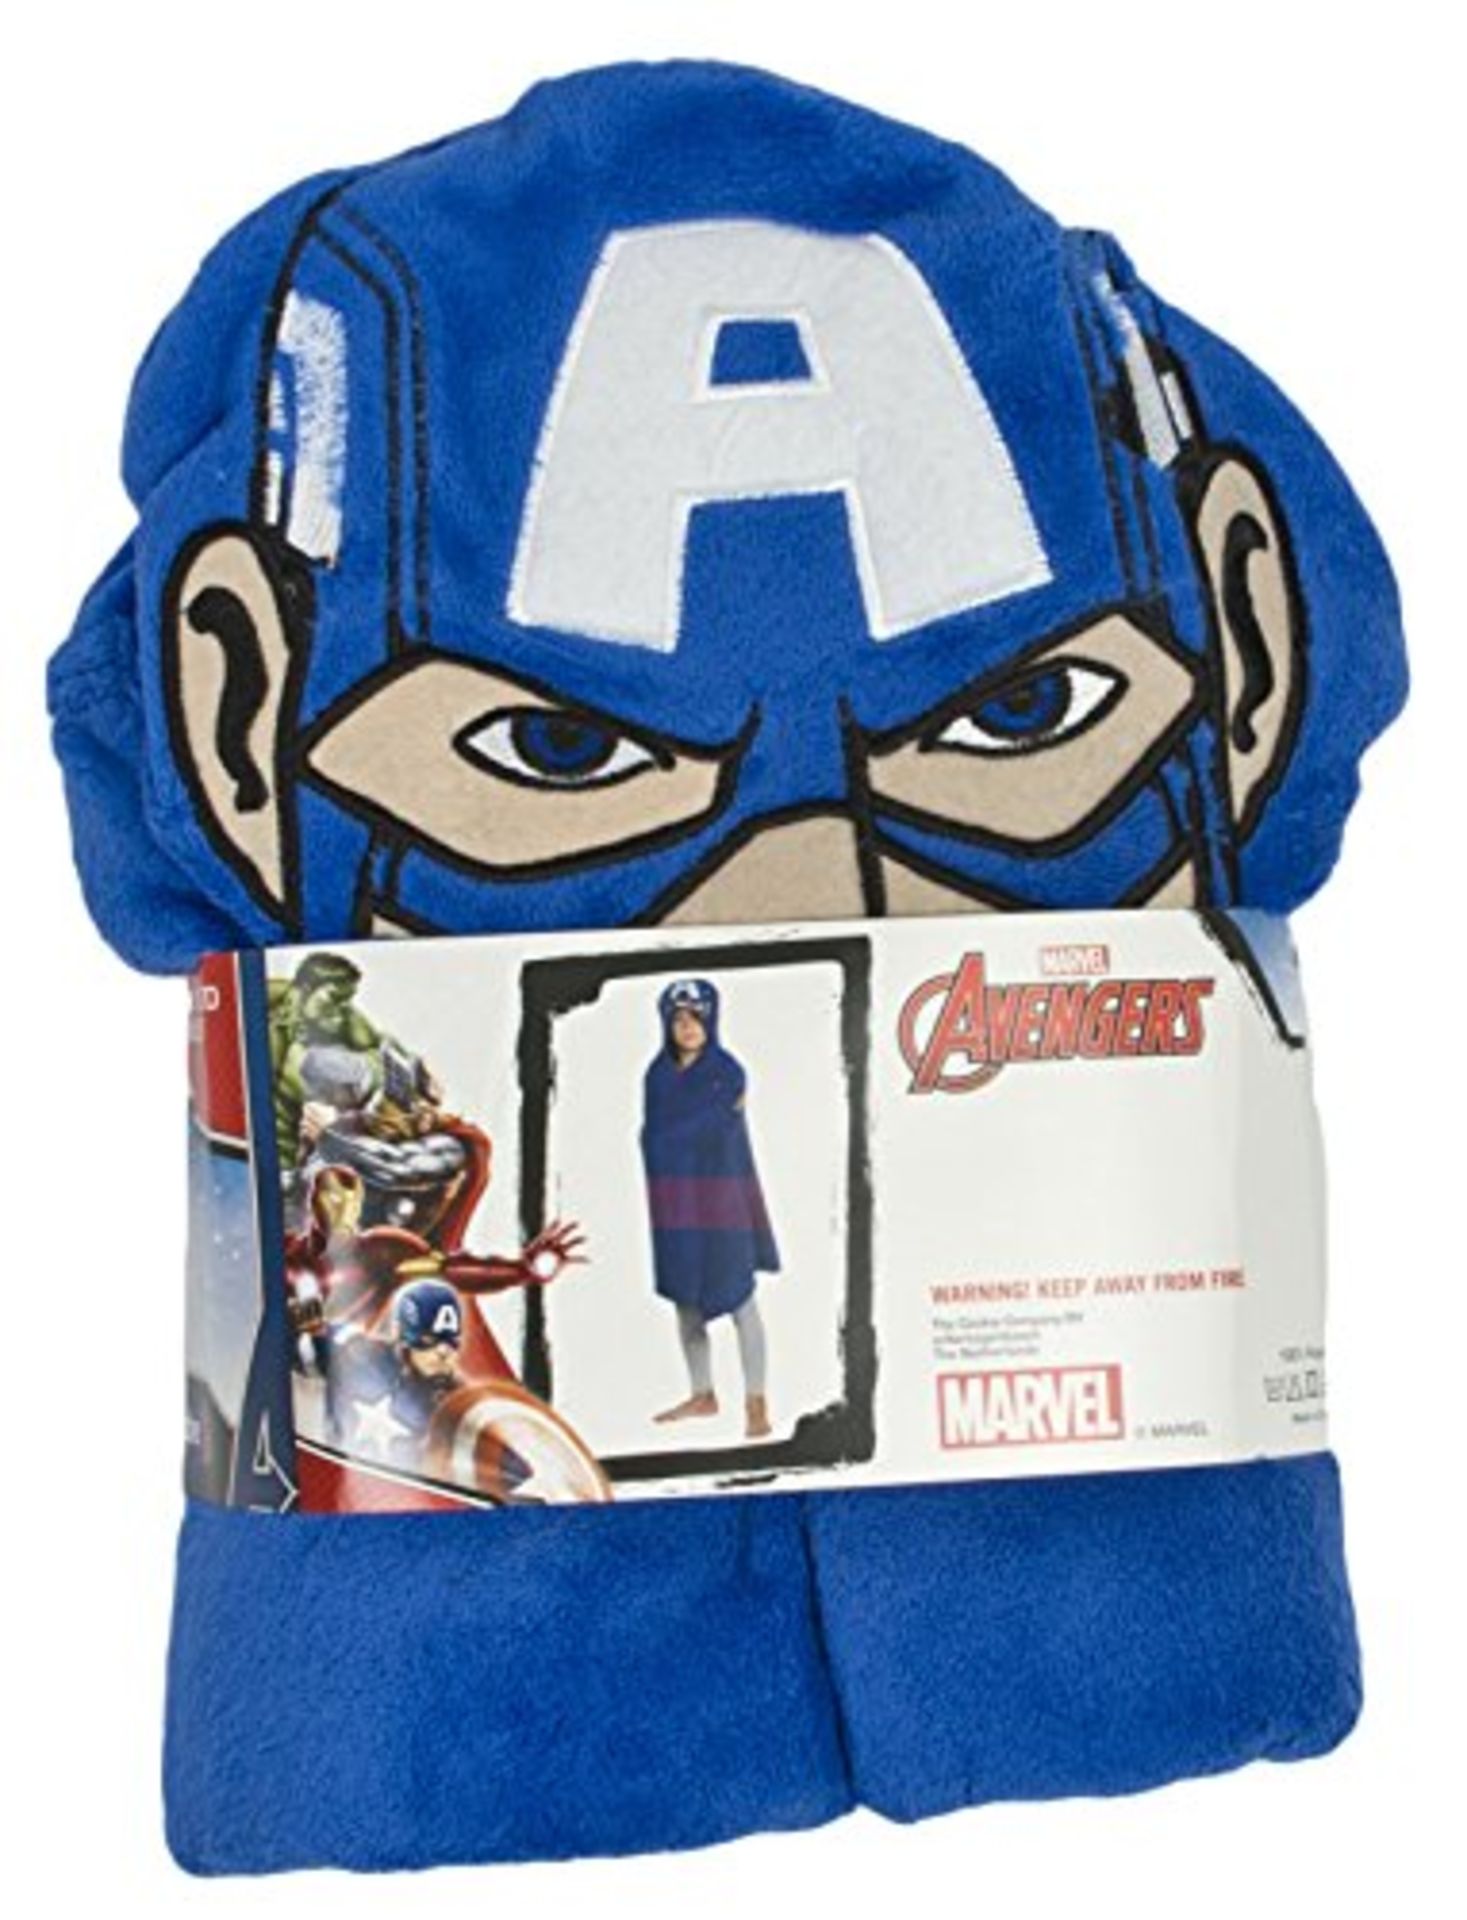 10pcs Brand new Sealed Marvel Captain America Cuddle Blanket with hood